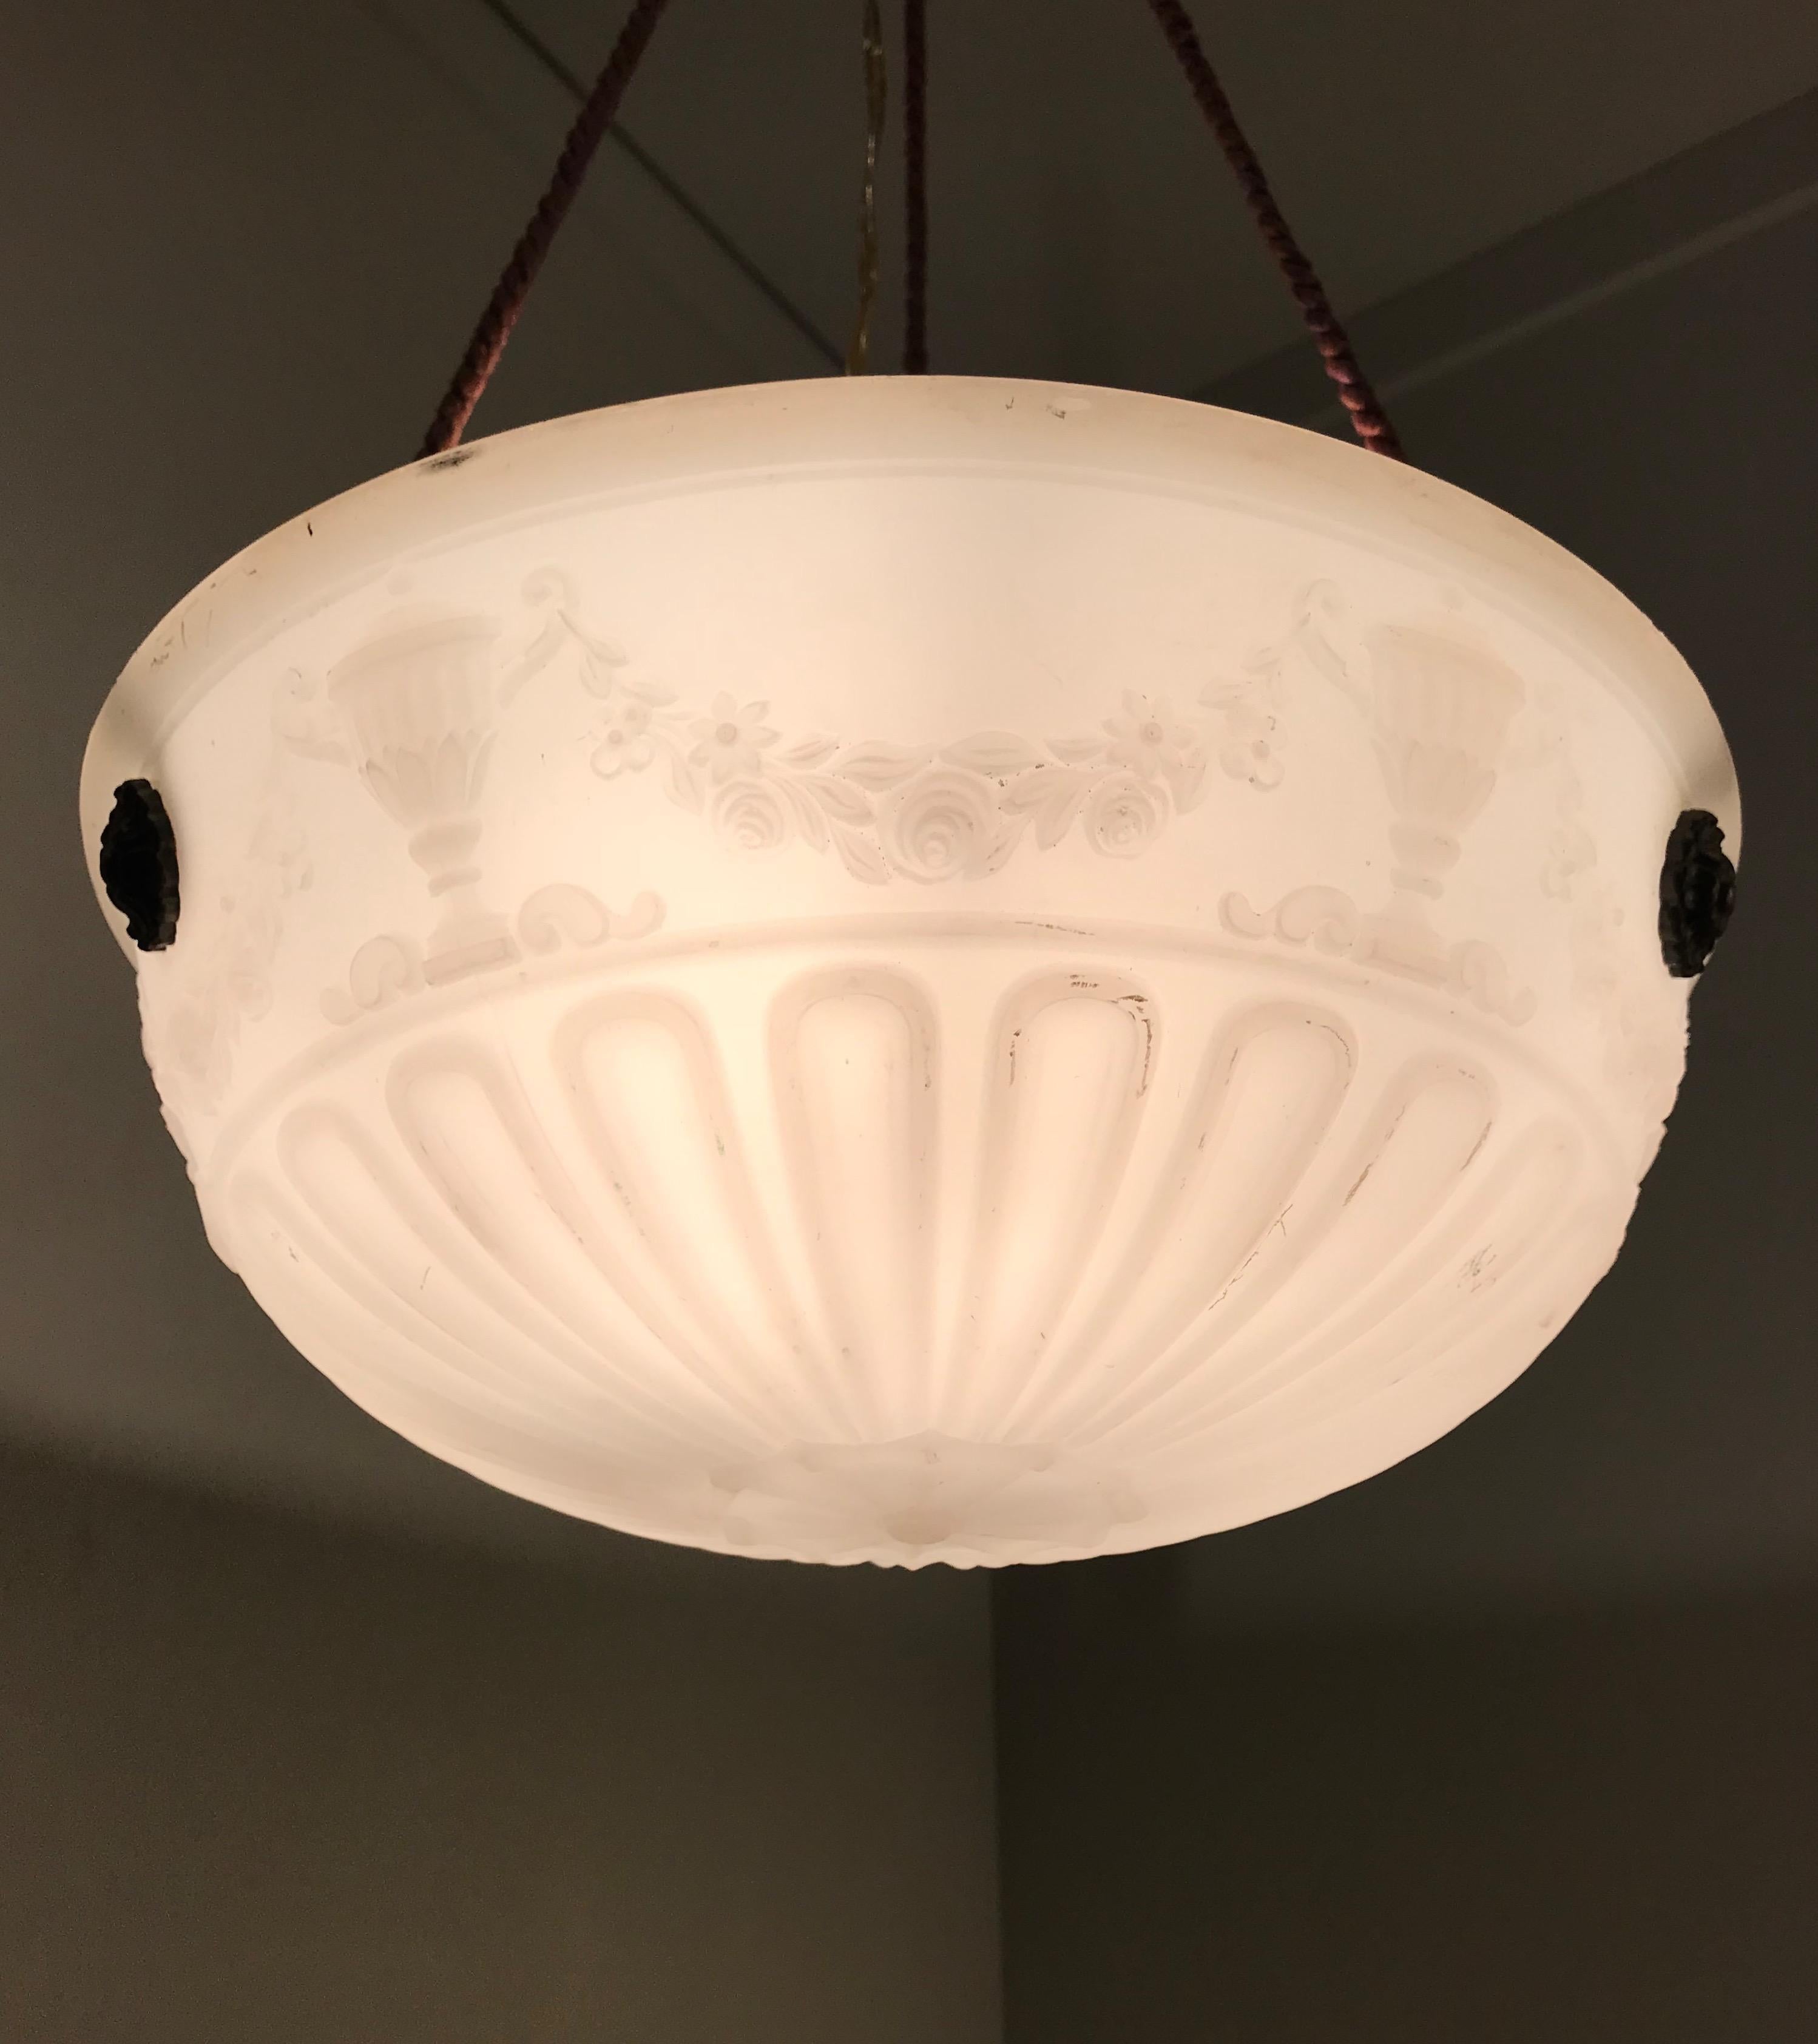 Striking Classical Design Press Glass with Original Rope Pendant / Light Fixture For Sale 3